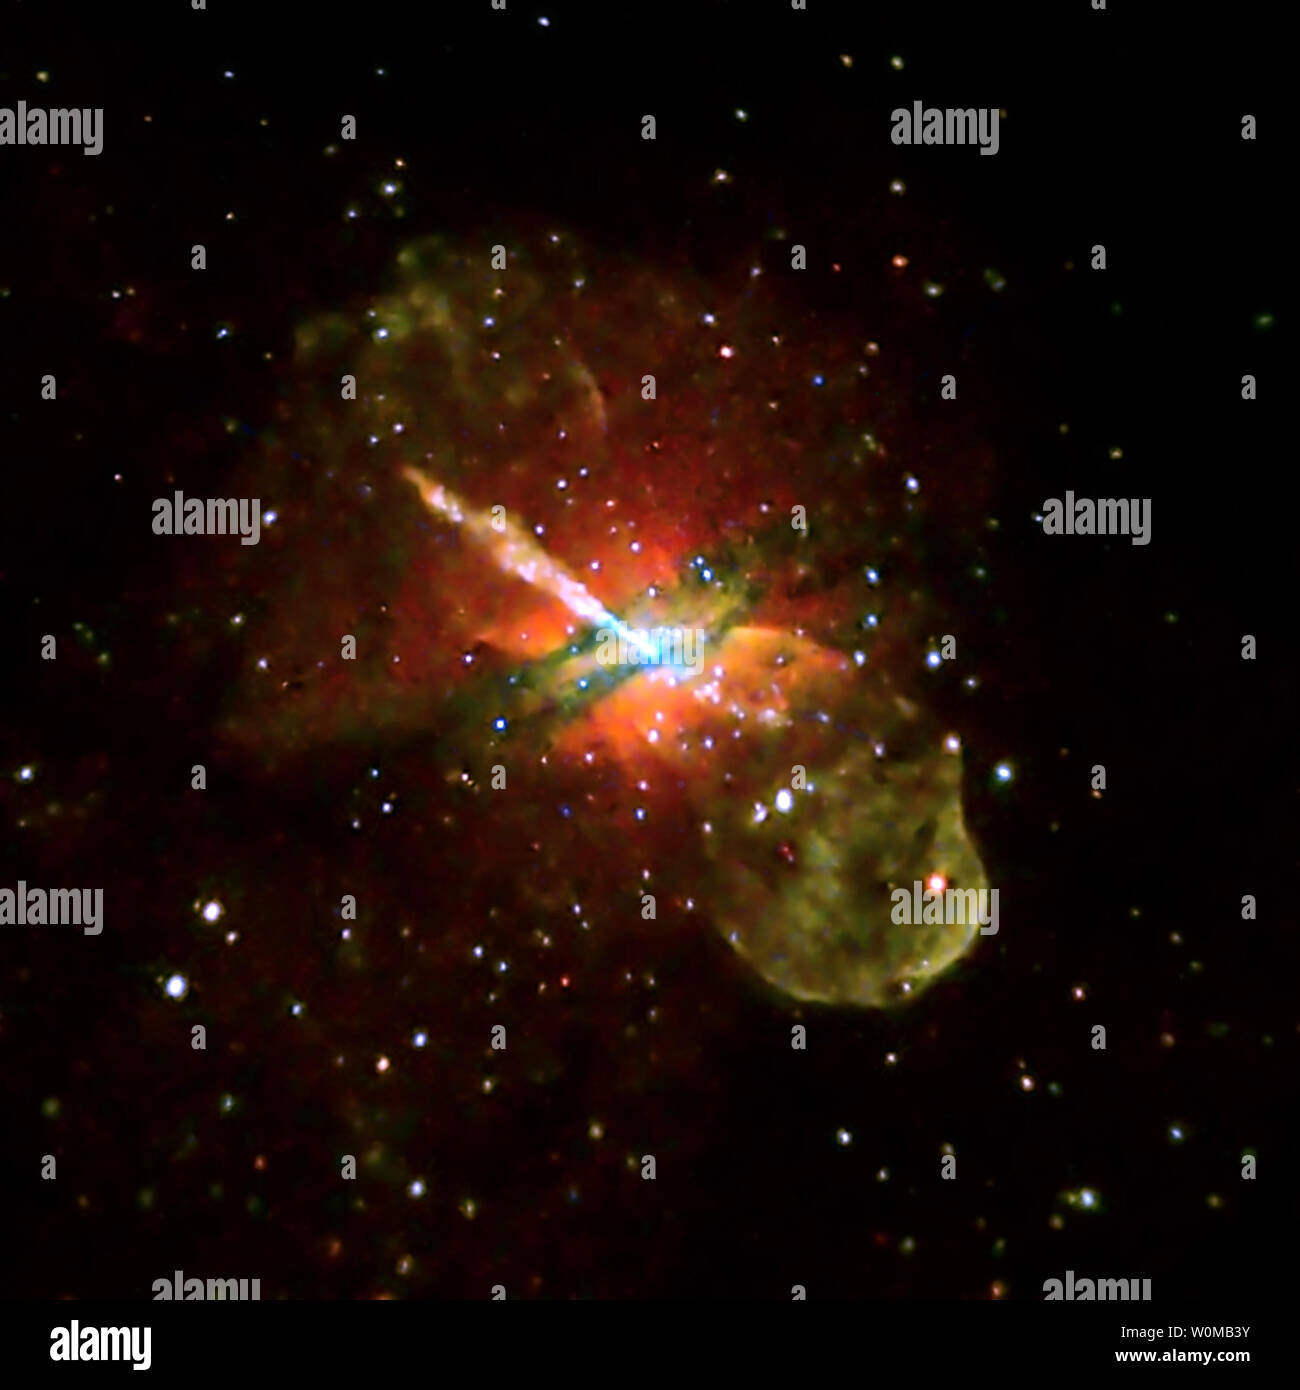 This undated NASA image obtained from the Chandra X-Ray Observatory shows galaxy Centaurus A and an active supermassive black hole. Opposing jets of high-energy particles can be seen extending to the outer reaches of the galaxy, and numerous smaller black holes in binary star systems are also visible. Centaurus A is the nearest galaxy to Earth that contains a supermassive black hole actively powering a jet. (UPI Photo/NASA) Stock Photo